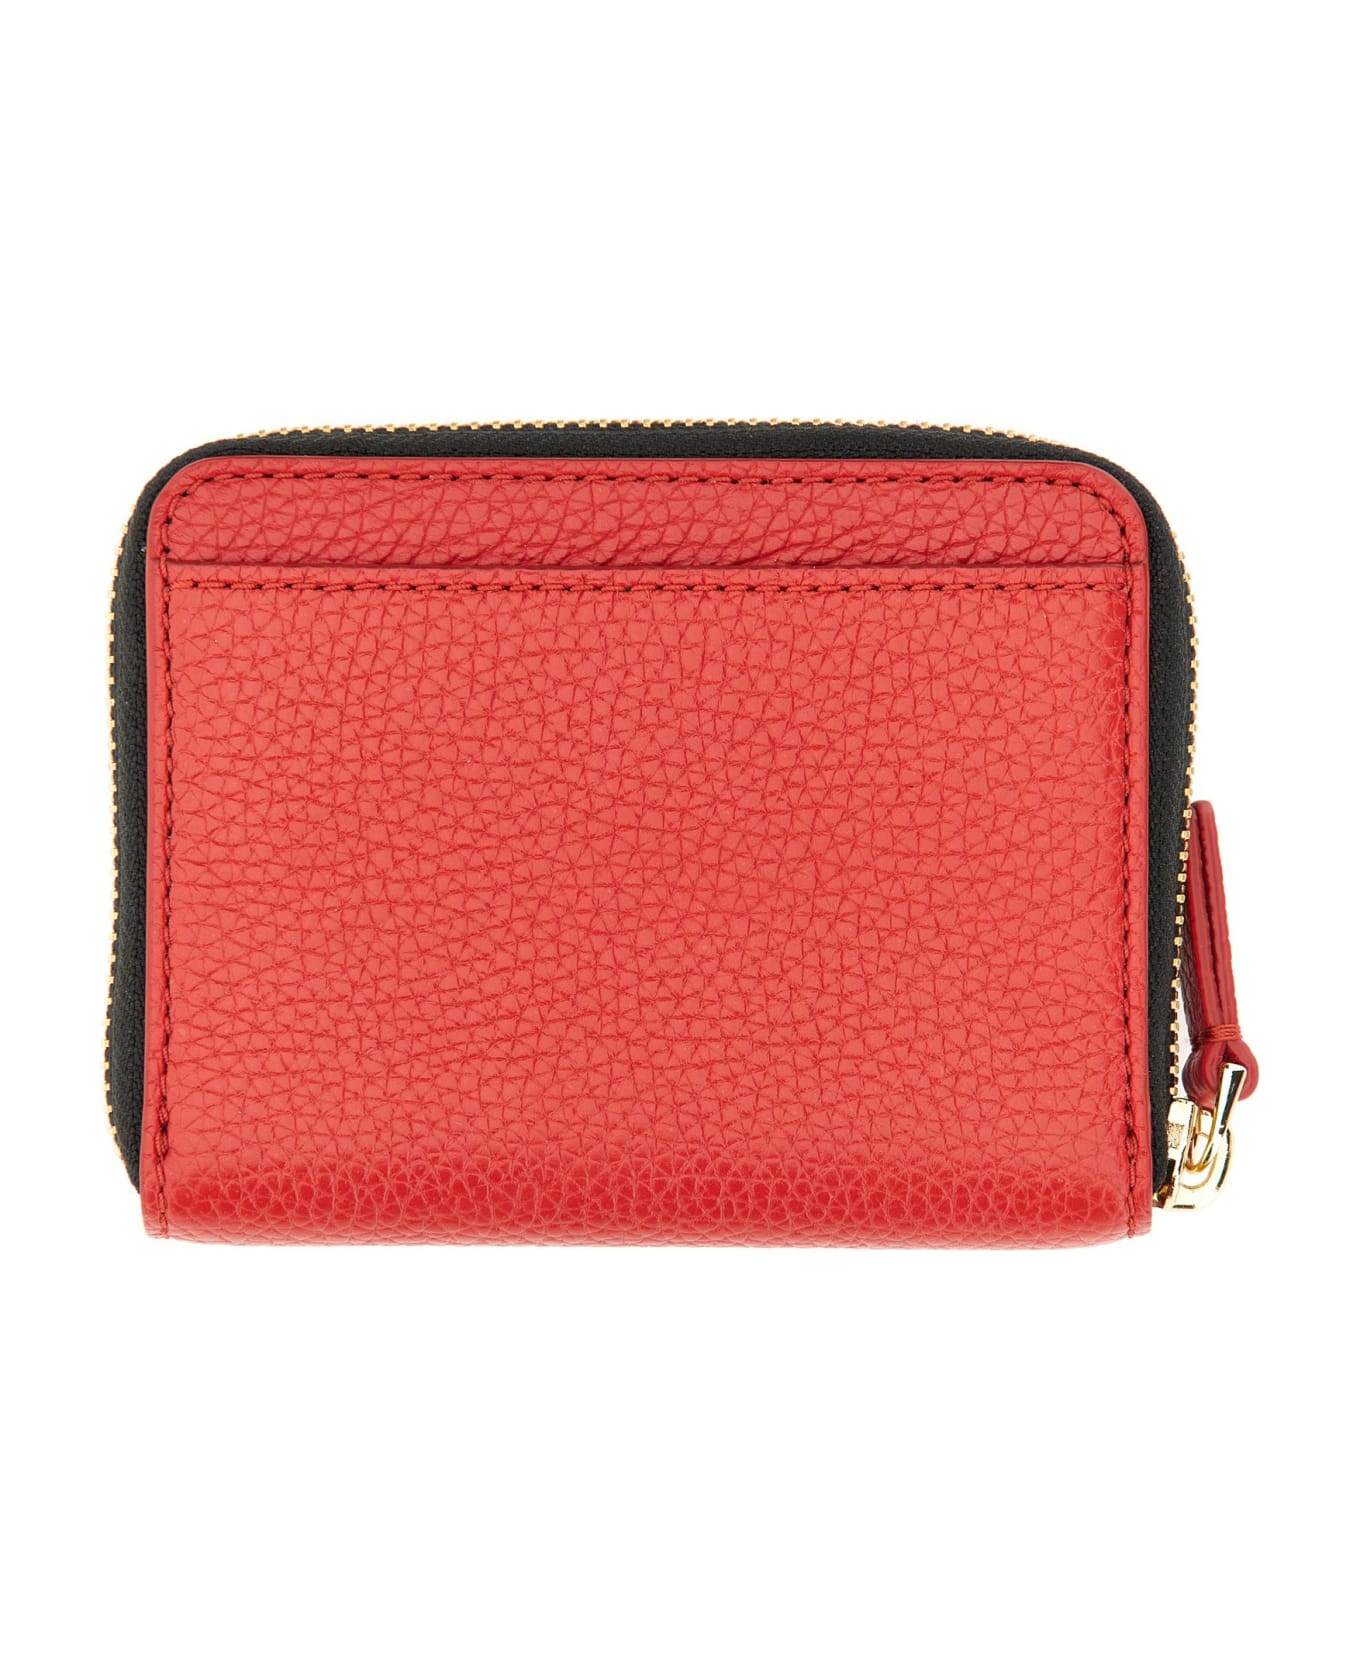 Marc Jacobs Leather Wallet With Zipper - ROSSO 財布